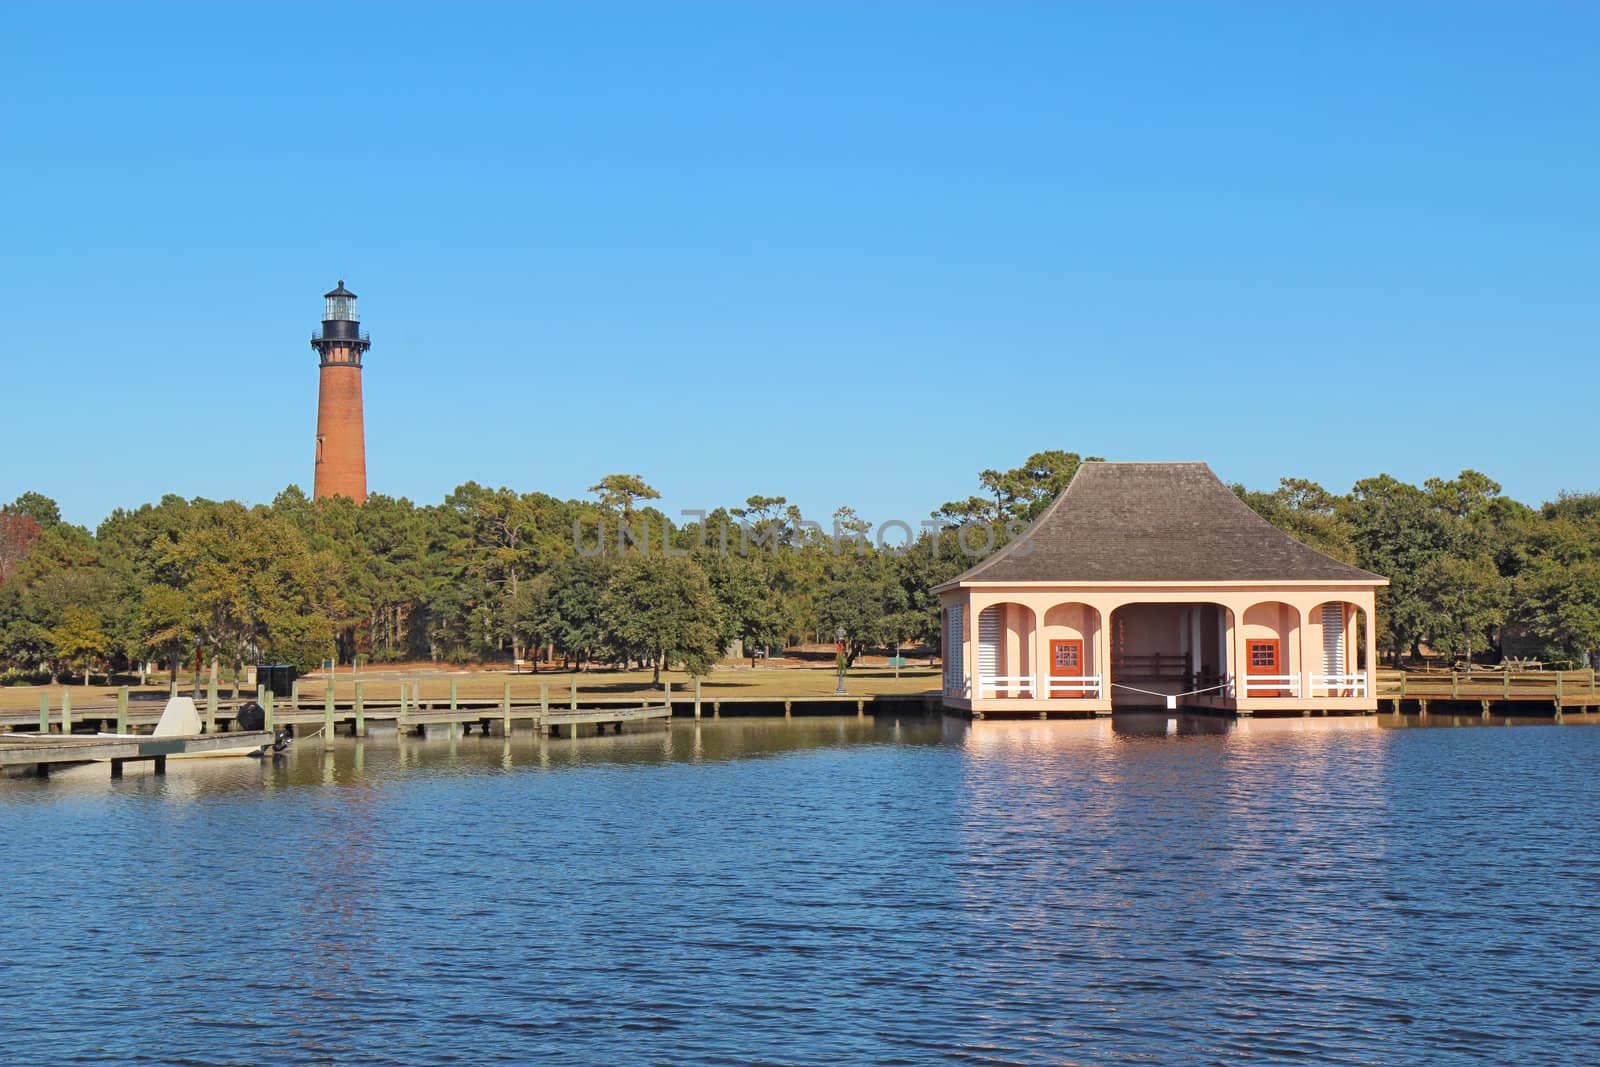 The red brick structure of the Currituck Beach Lighthouse and the pink boathouse at Currituck Heritage Park near Corolla, North Carolina